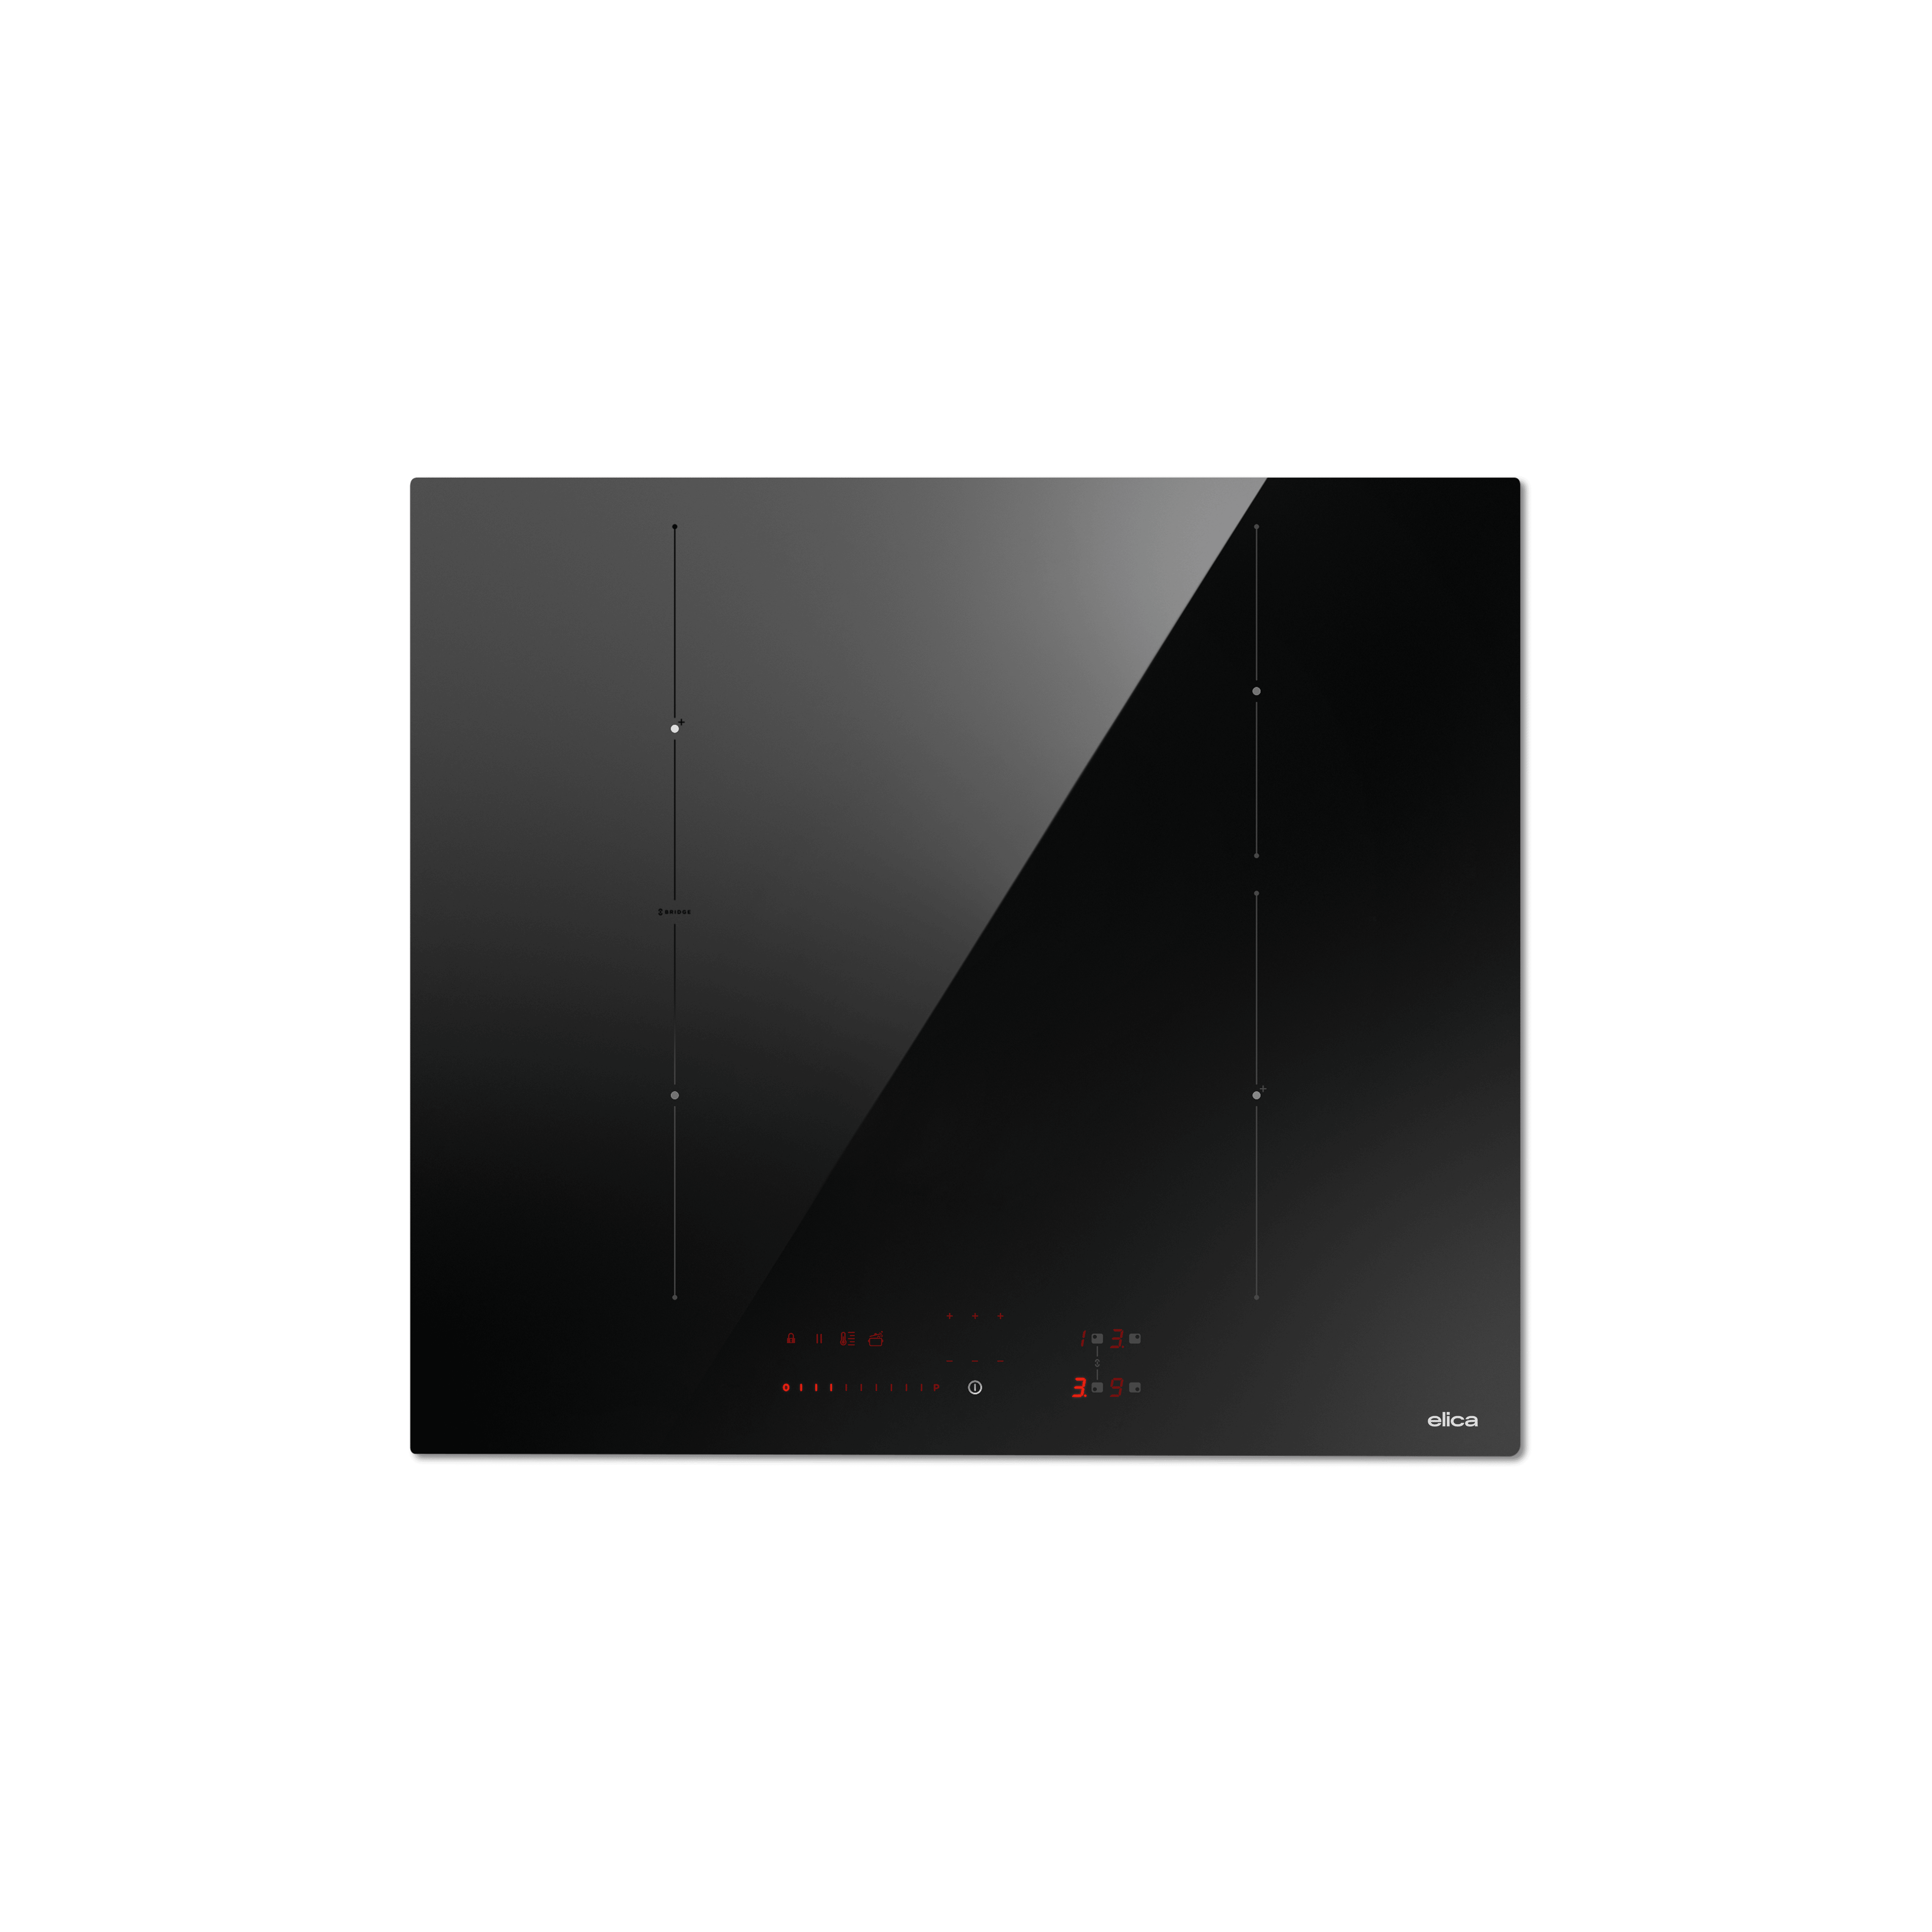 Hobs Induction Hobs RATIO 604 PLUS suggested